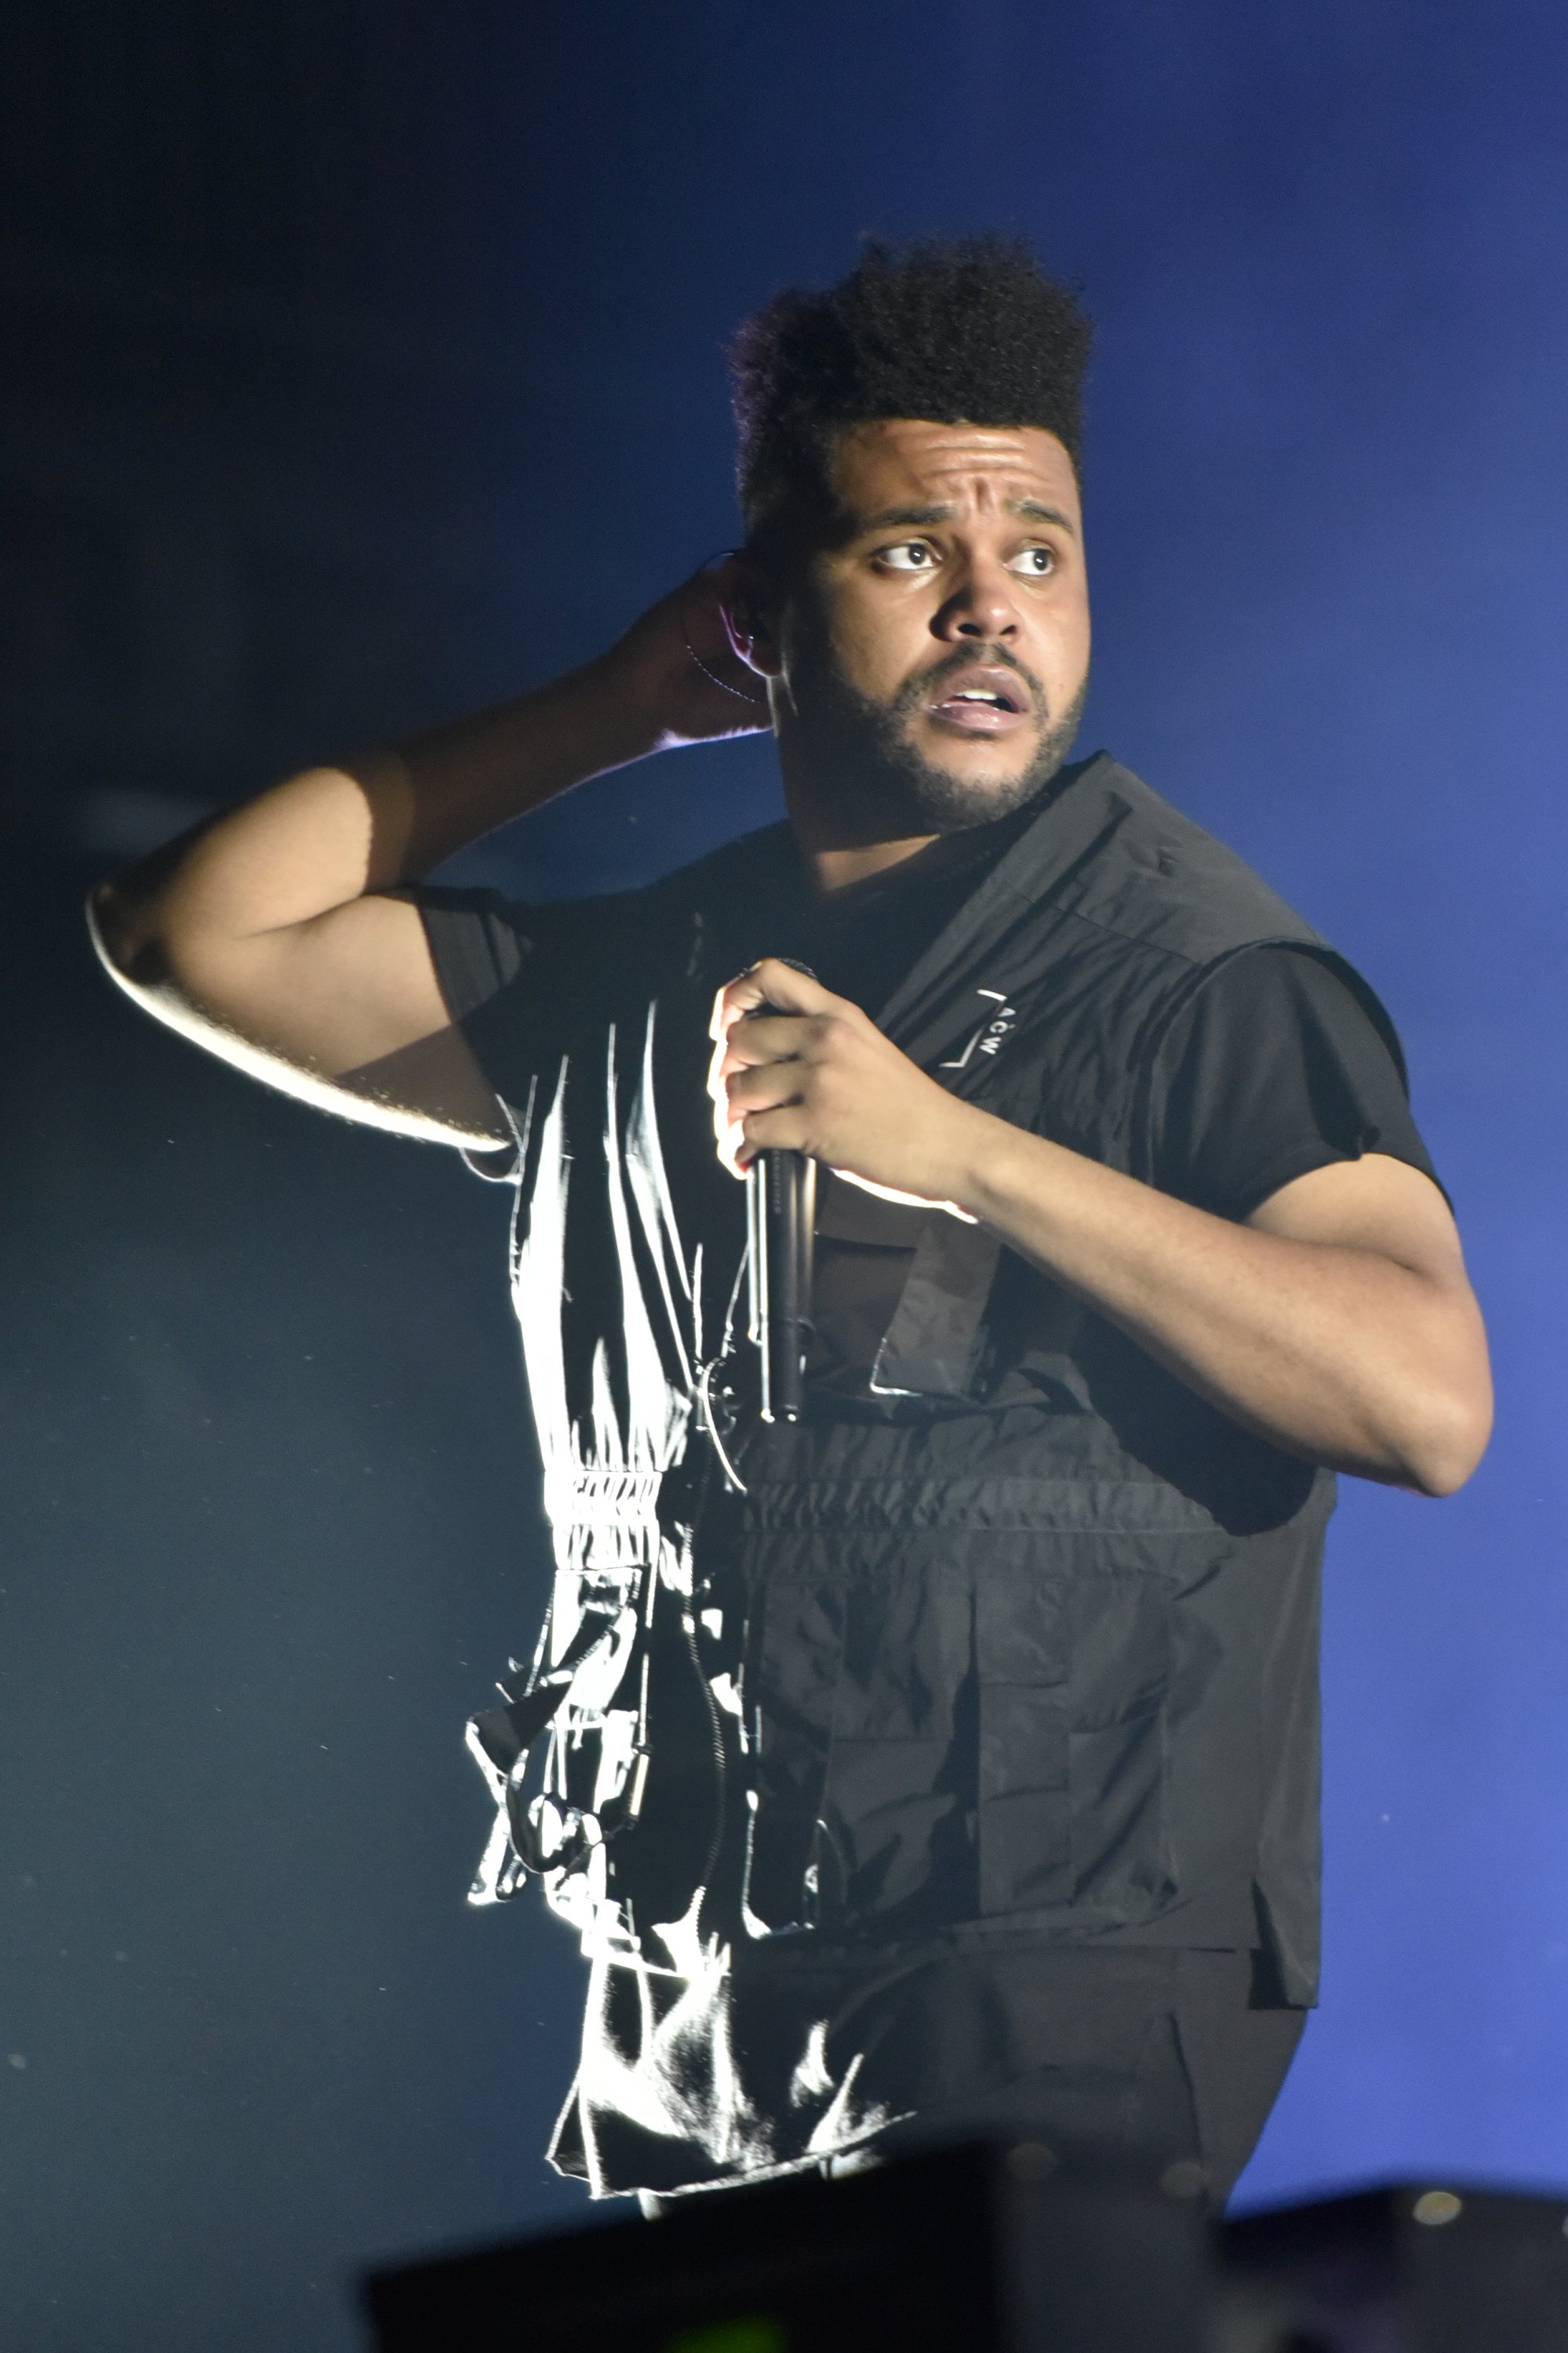 The Weeknd performs on day three at Lollapalooza in Chicago, U.S., on Aug. 4, 2018. (AP PHOTO)